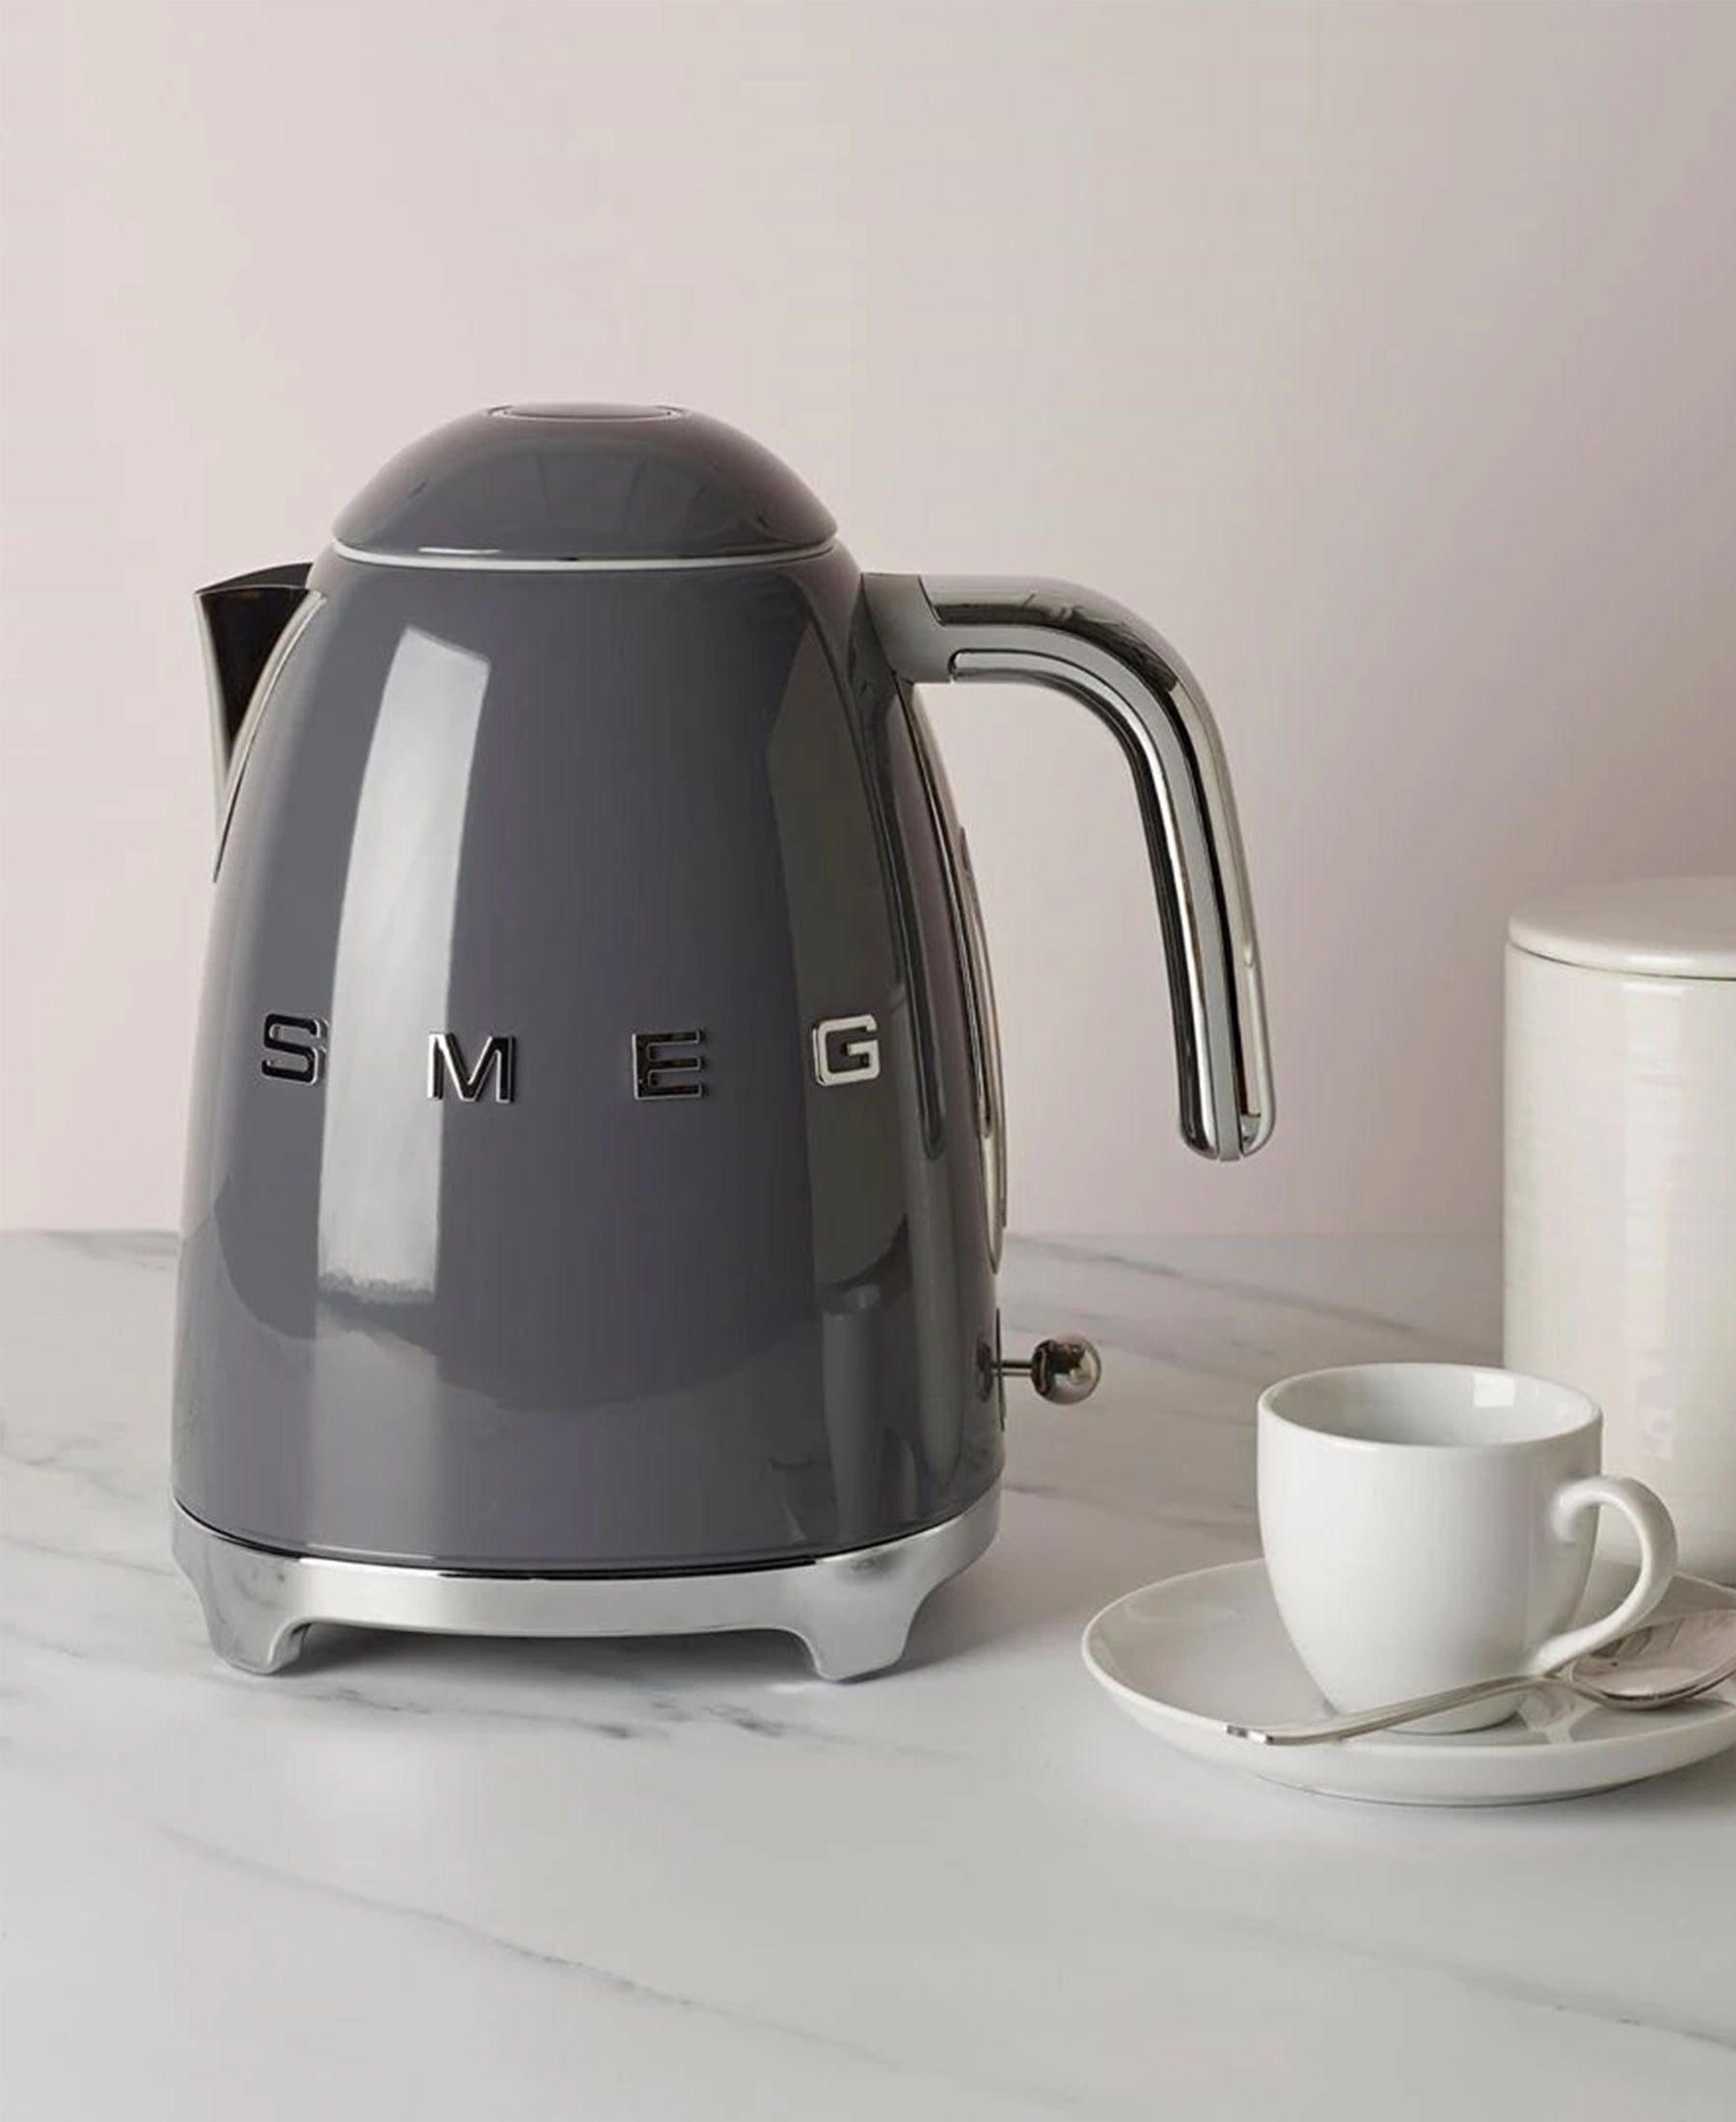 Newage Electrical, Smeg KLF03GRUK 1.7 Litre Retro Style Kettle - Slate  Grey, A large retail outlet on the outskirts of Newry City